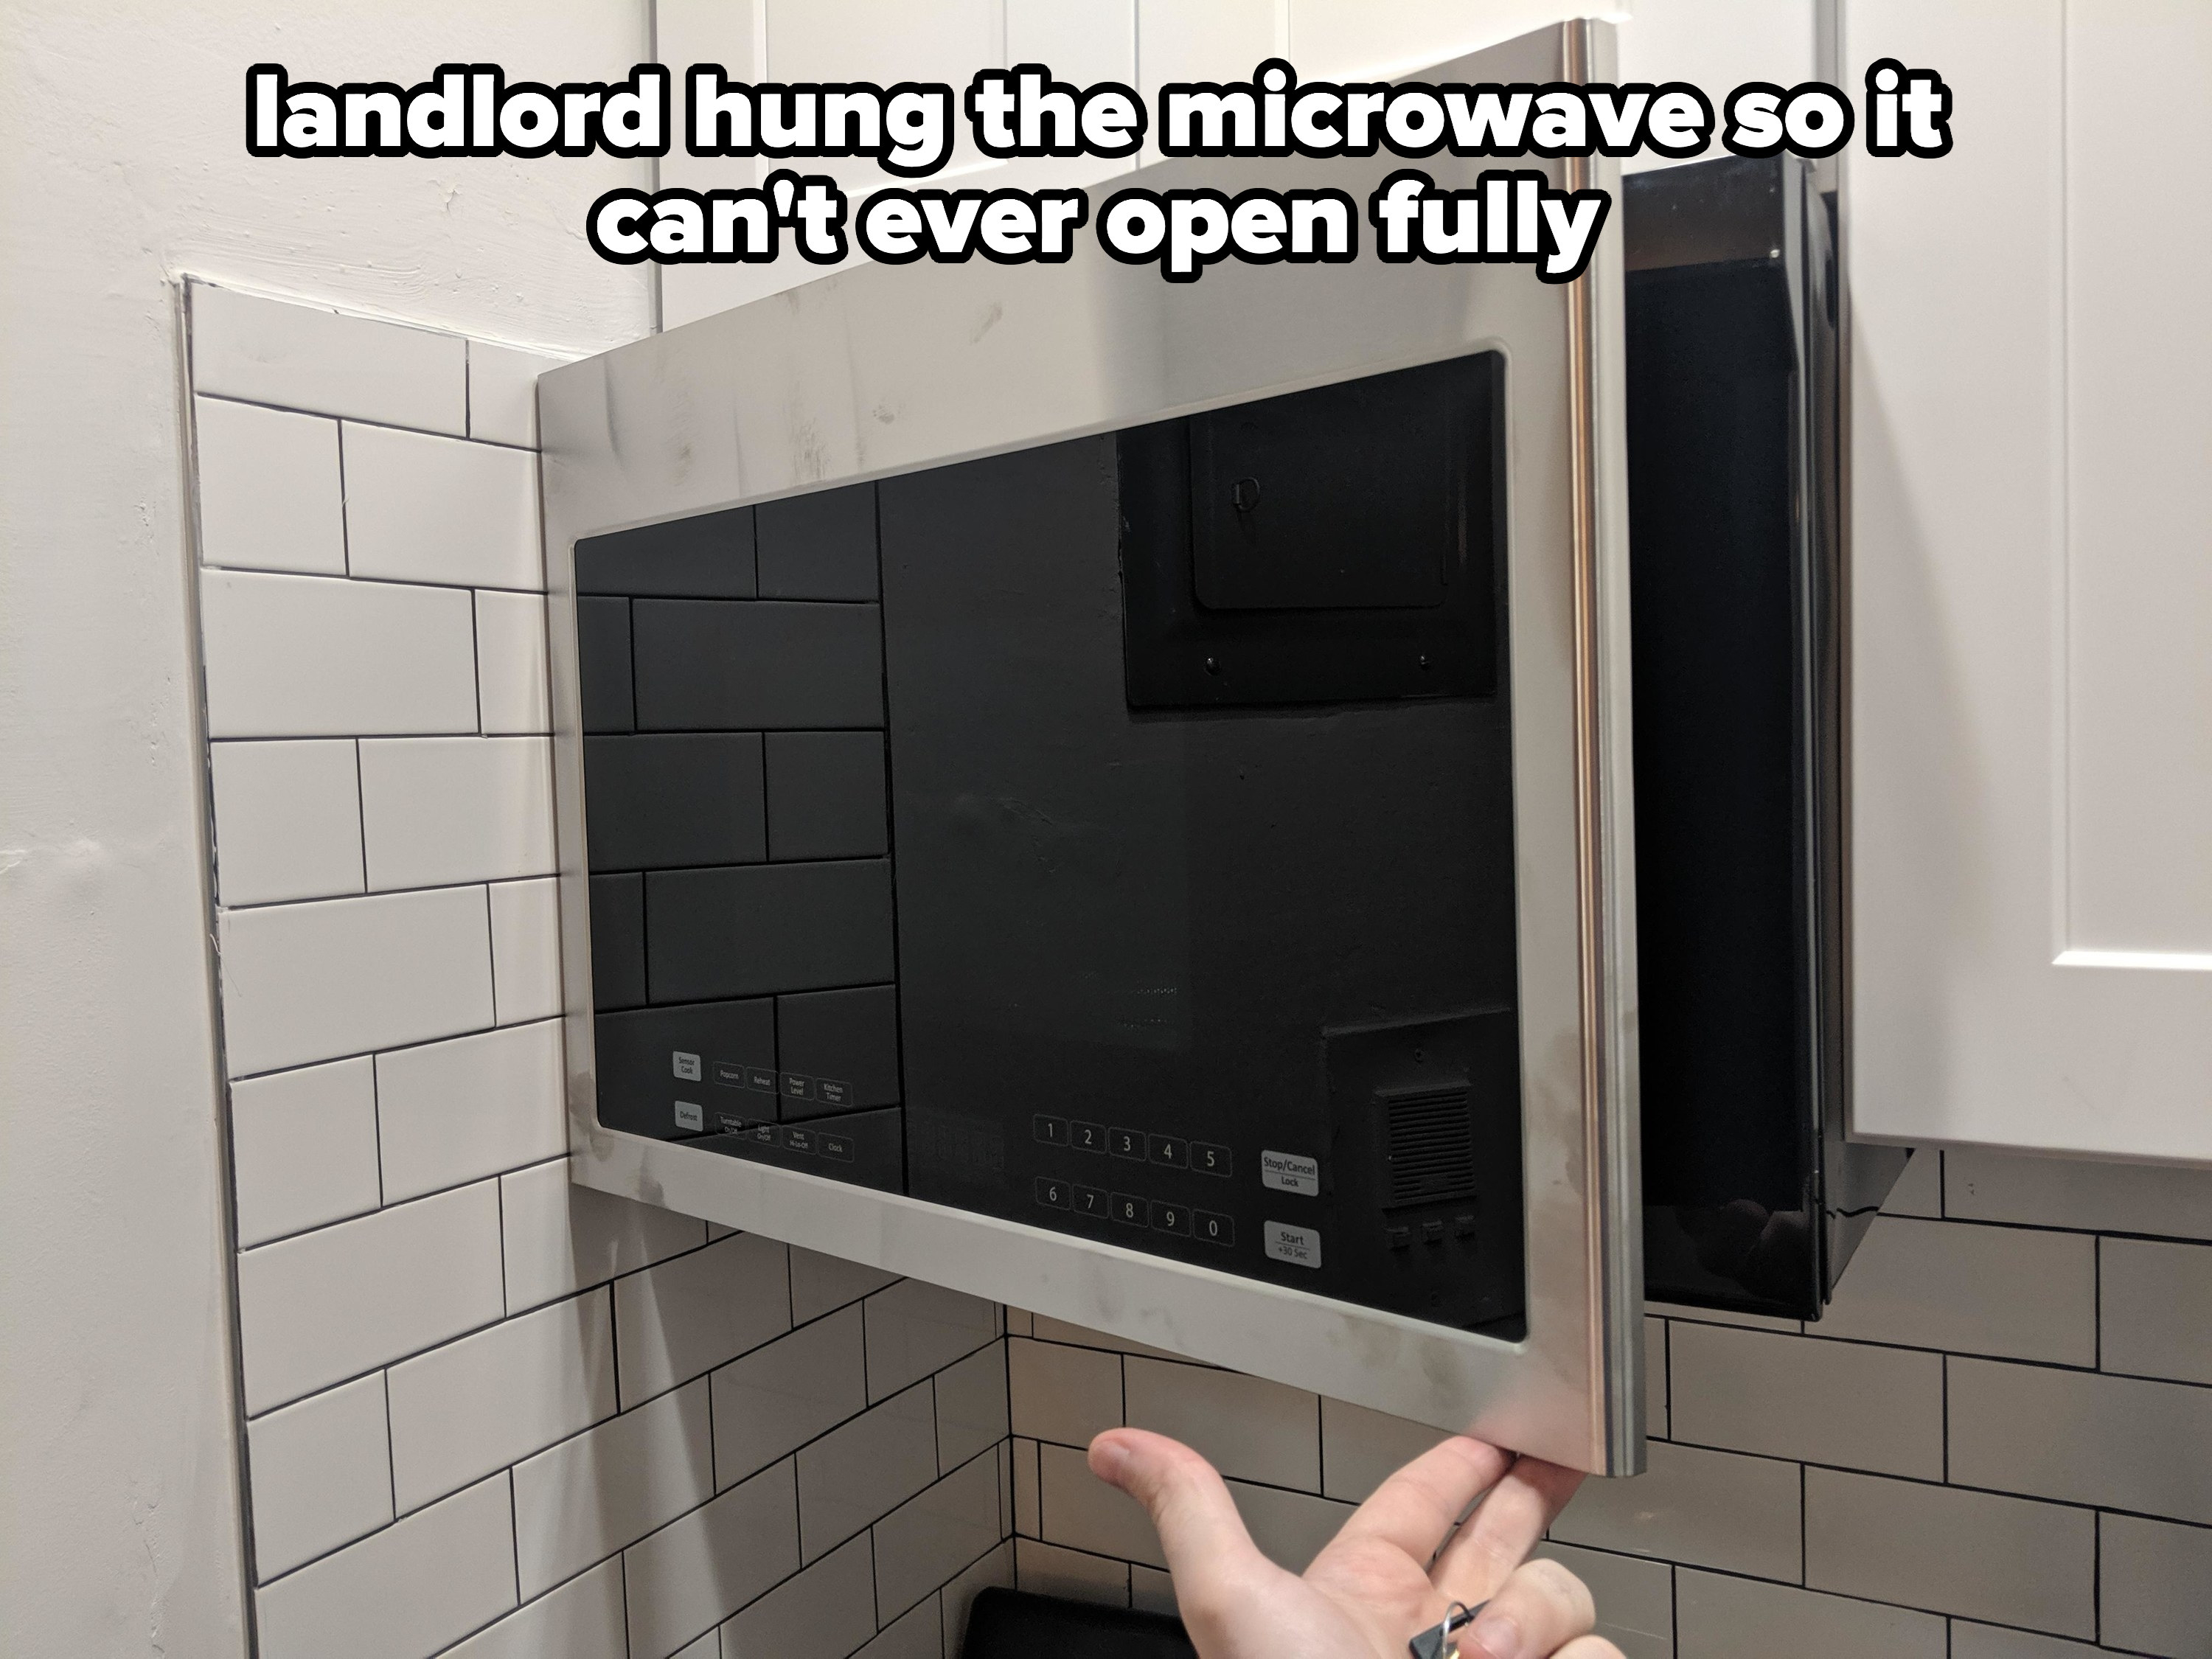 microwave installed right next to a wall so it cannot open fully